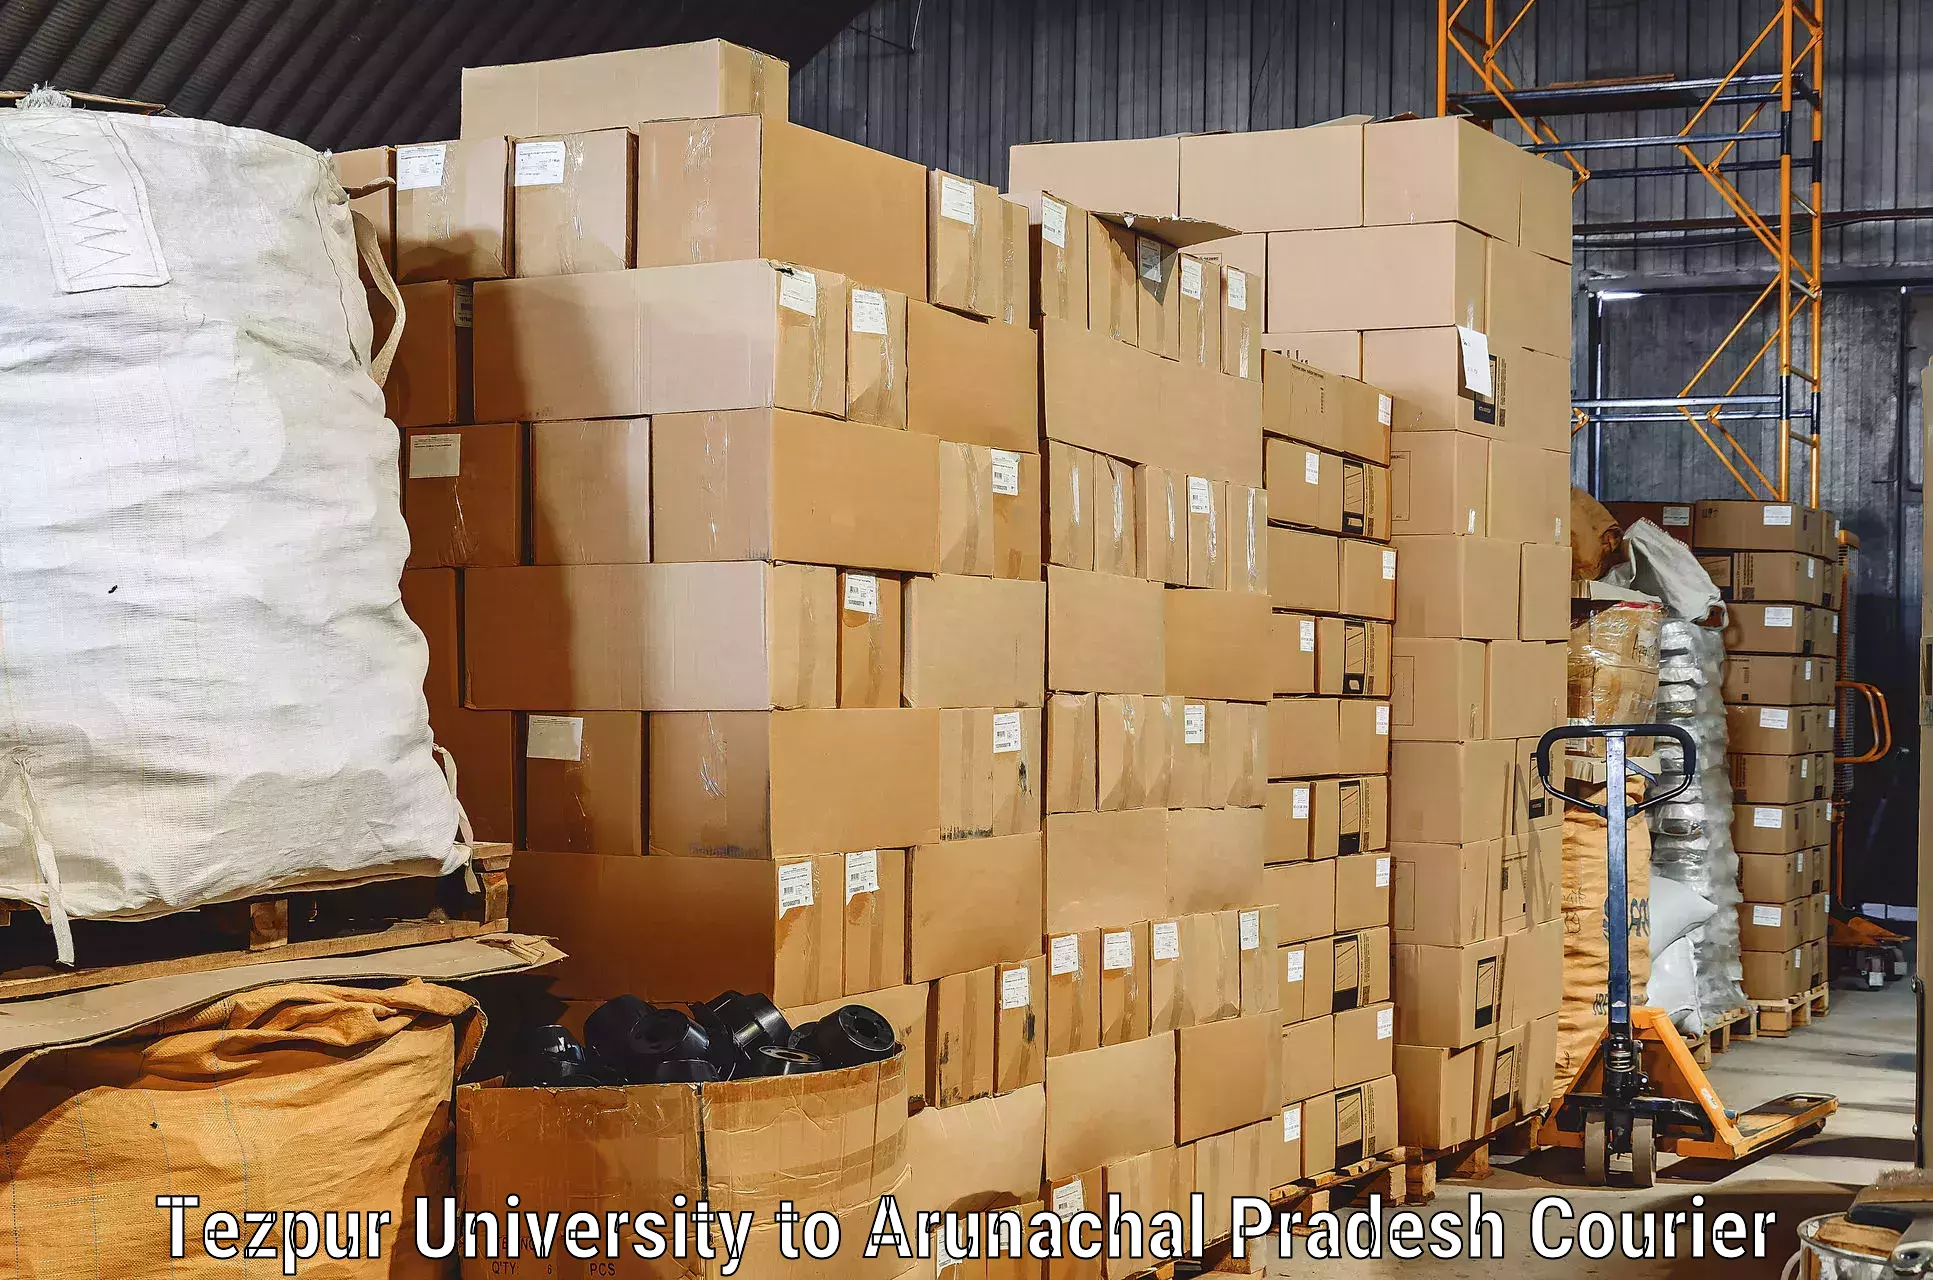 Furniture transport services in Tezpur University to Aalo